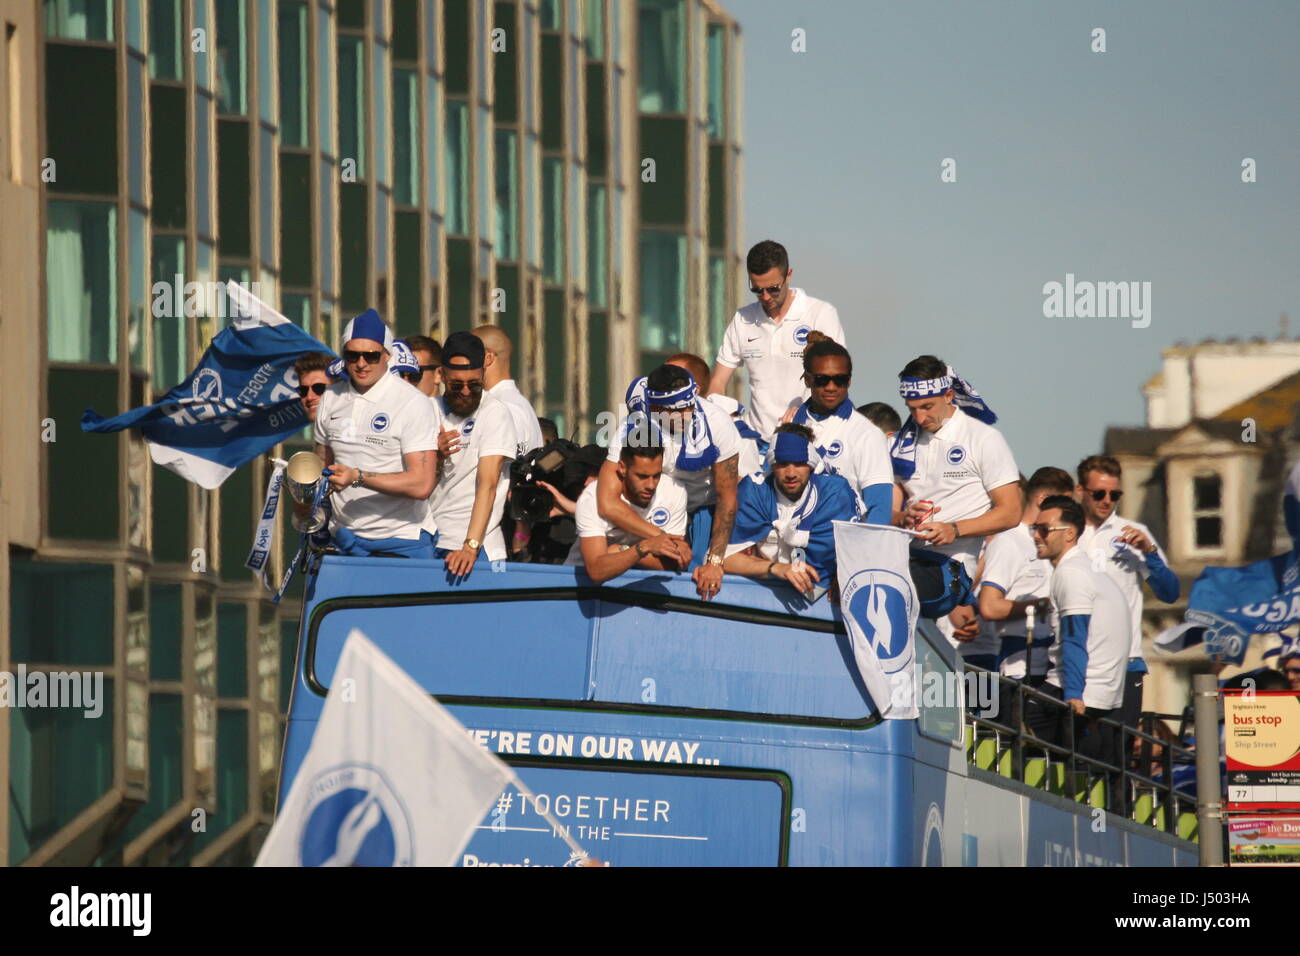 Brighton, UK. 14th May 2017. Fans of Brighton and Hove Albion Football Club Came out in their thousands to watch the team's bus-top parade along the city's coast road. Team and fans were celebrating promotion to the Premiership. Roland Ravenhill/ Alamy Live News Stock Photo